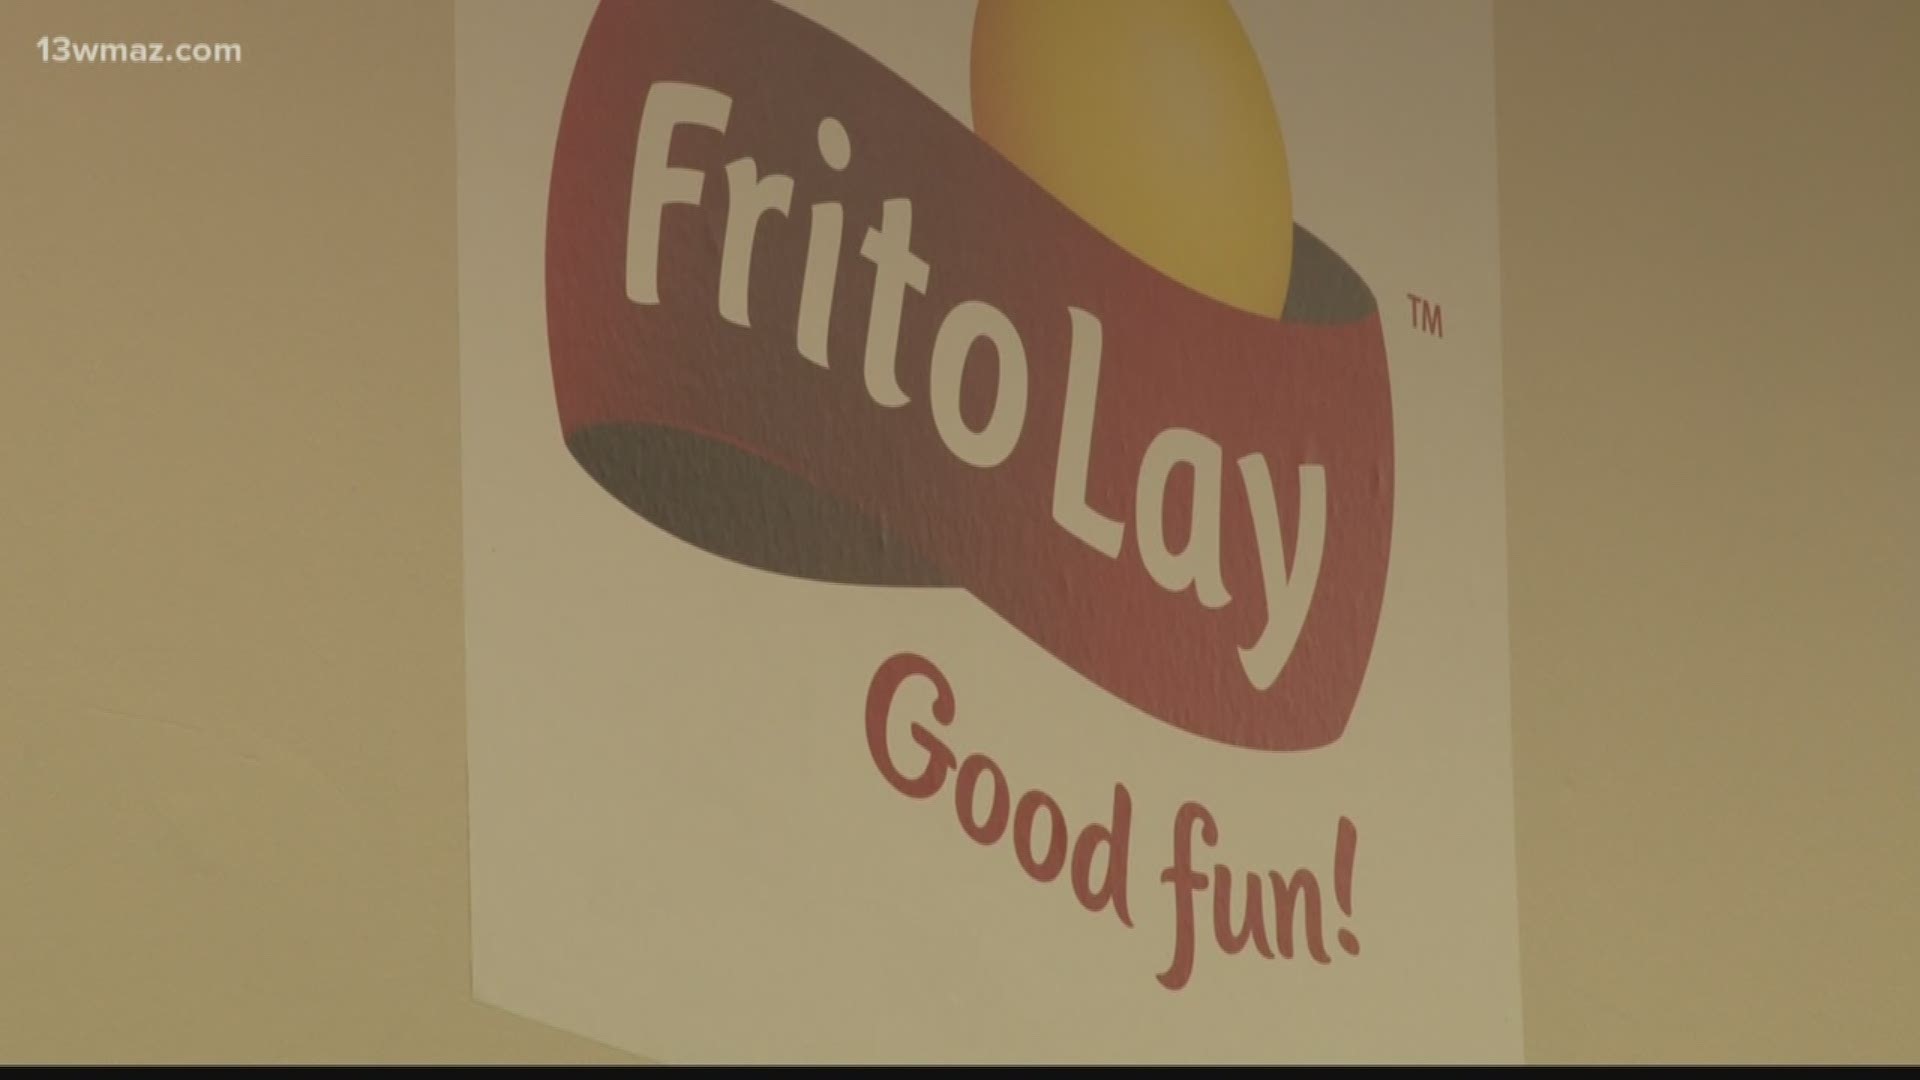 Students train in class for Frito-Lay jobs